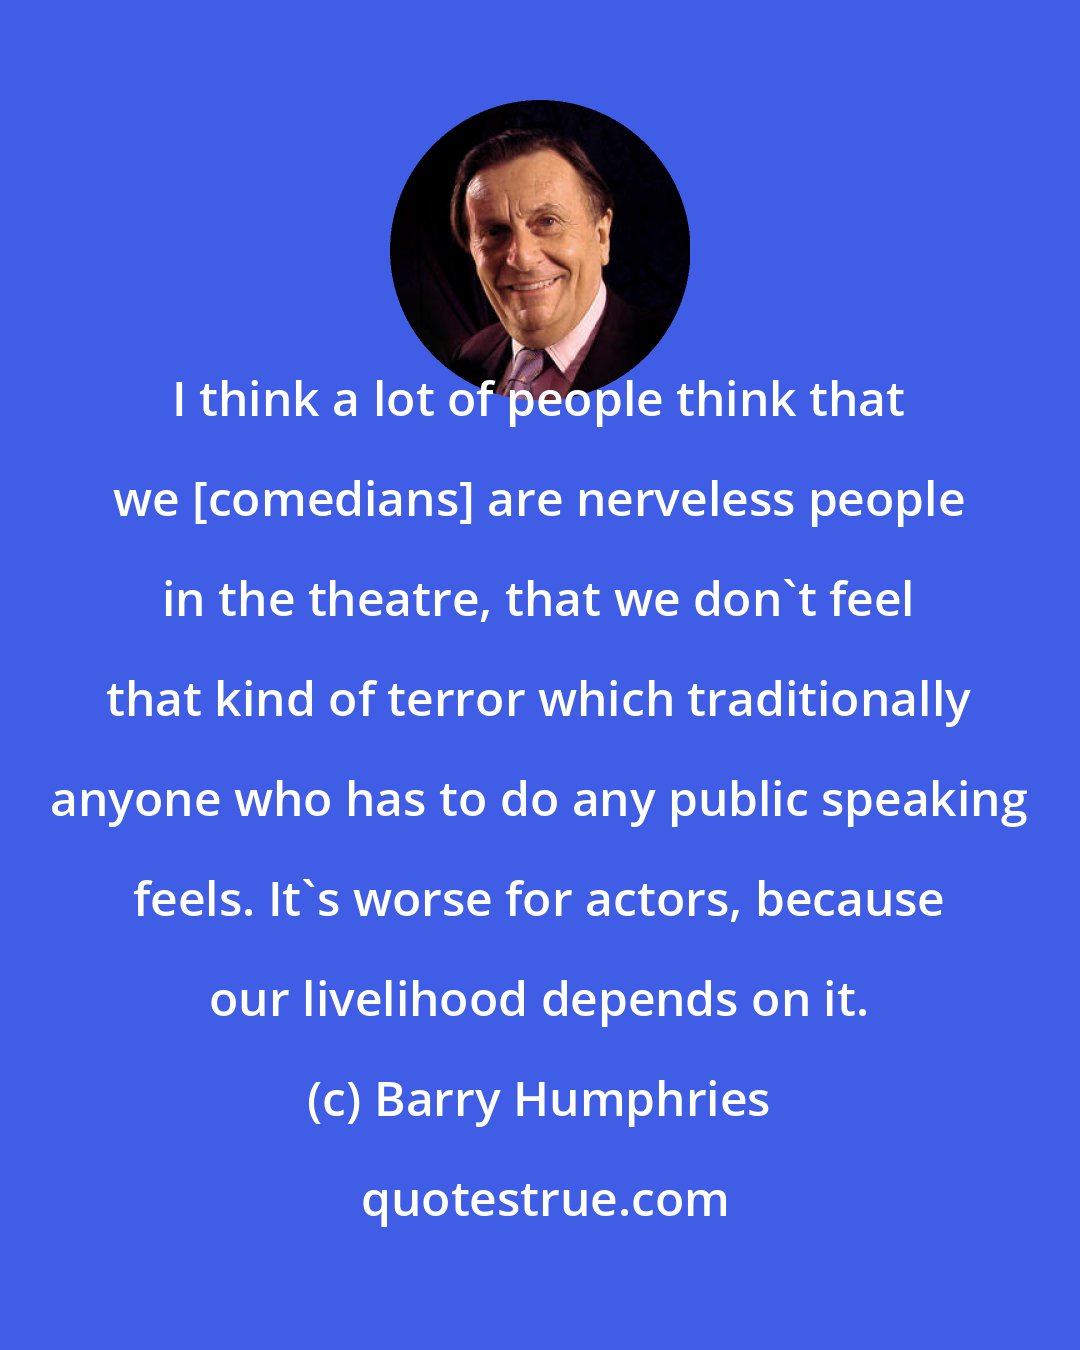 Barry Humphries: I think a lot of people think that we [comedians] are nerveless people in the theatre, that we don't feel that kind of terror which traditionally anyone who has to do any public speaking feels. It's worse for actors, because our livelihood depends on it.